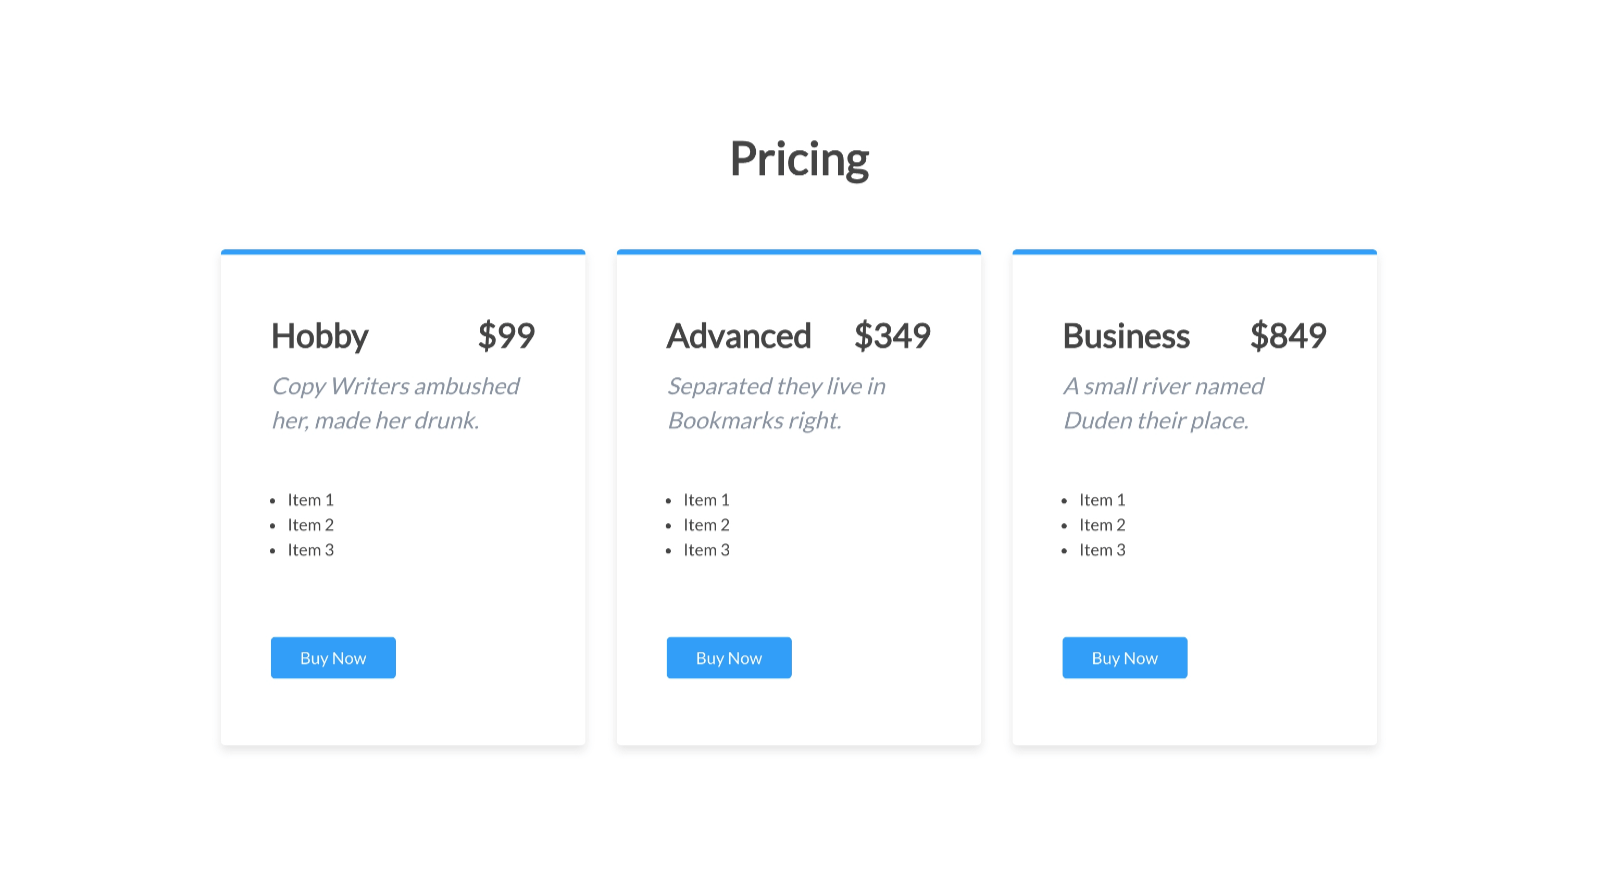 A dynamic pricing page layout with three options, featuring prominent call-to-action buttons